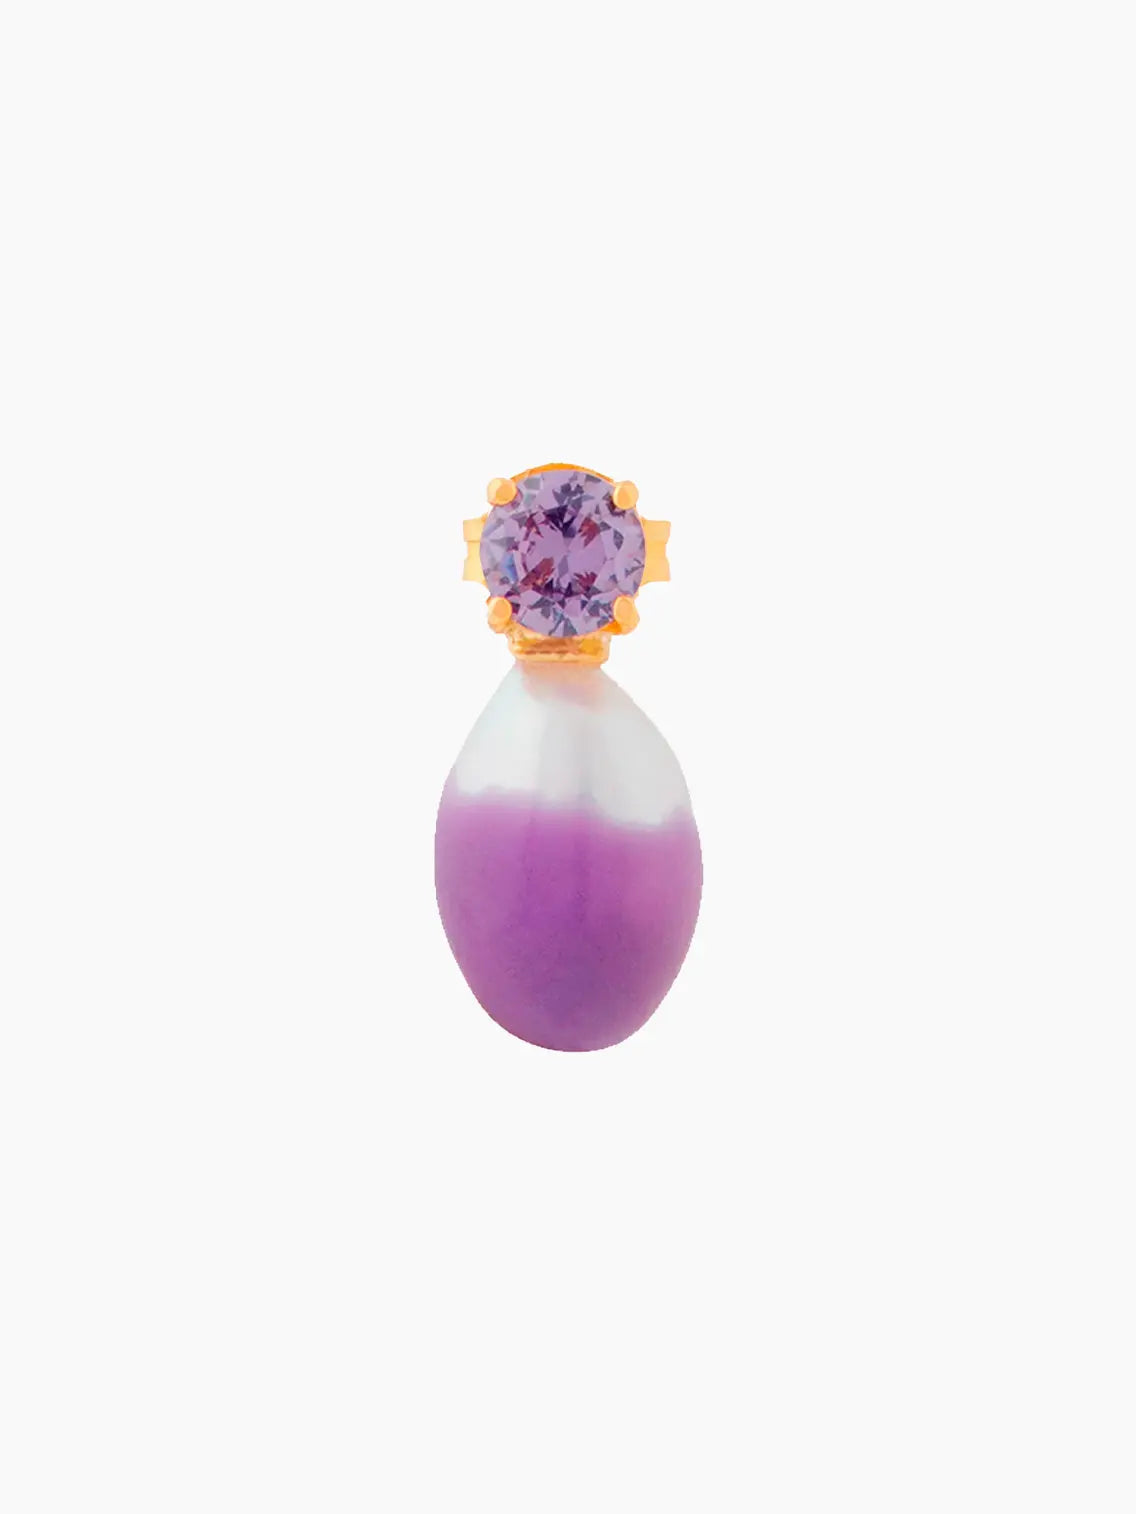 An elegant earring from Wilhelmina Garcia featuring a round purple gemstone set in a gold-colored prong, adorned with a teardrop-shaped purple and white gradient charm beneath it. The Swan Lake Pearl Earring has a sophisticated and modern design with a vibrant color scheme, perfect for any fashion-forward Barcelona resident.